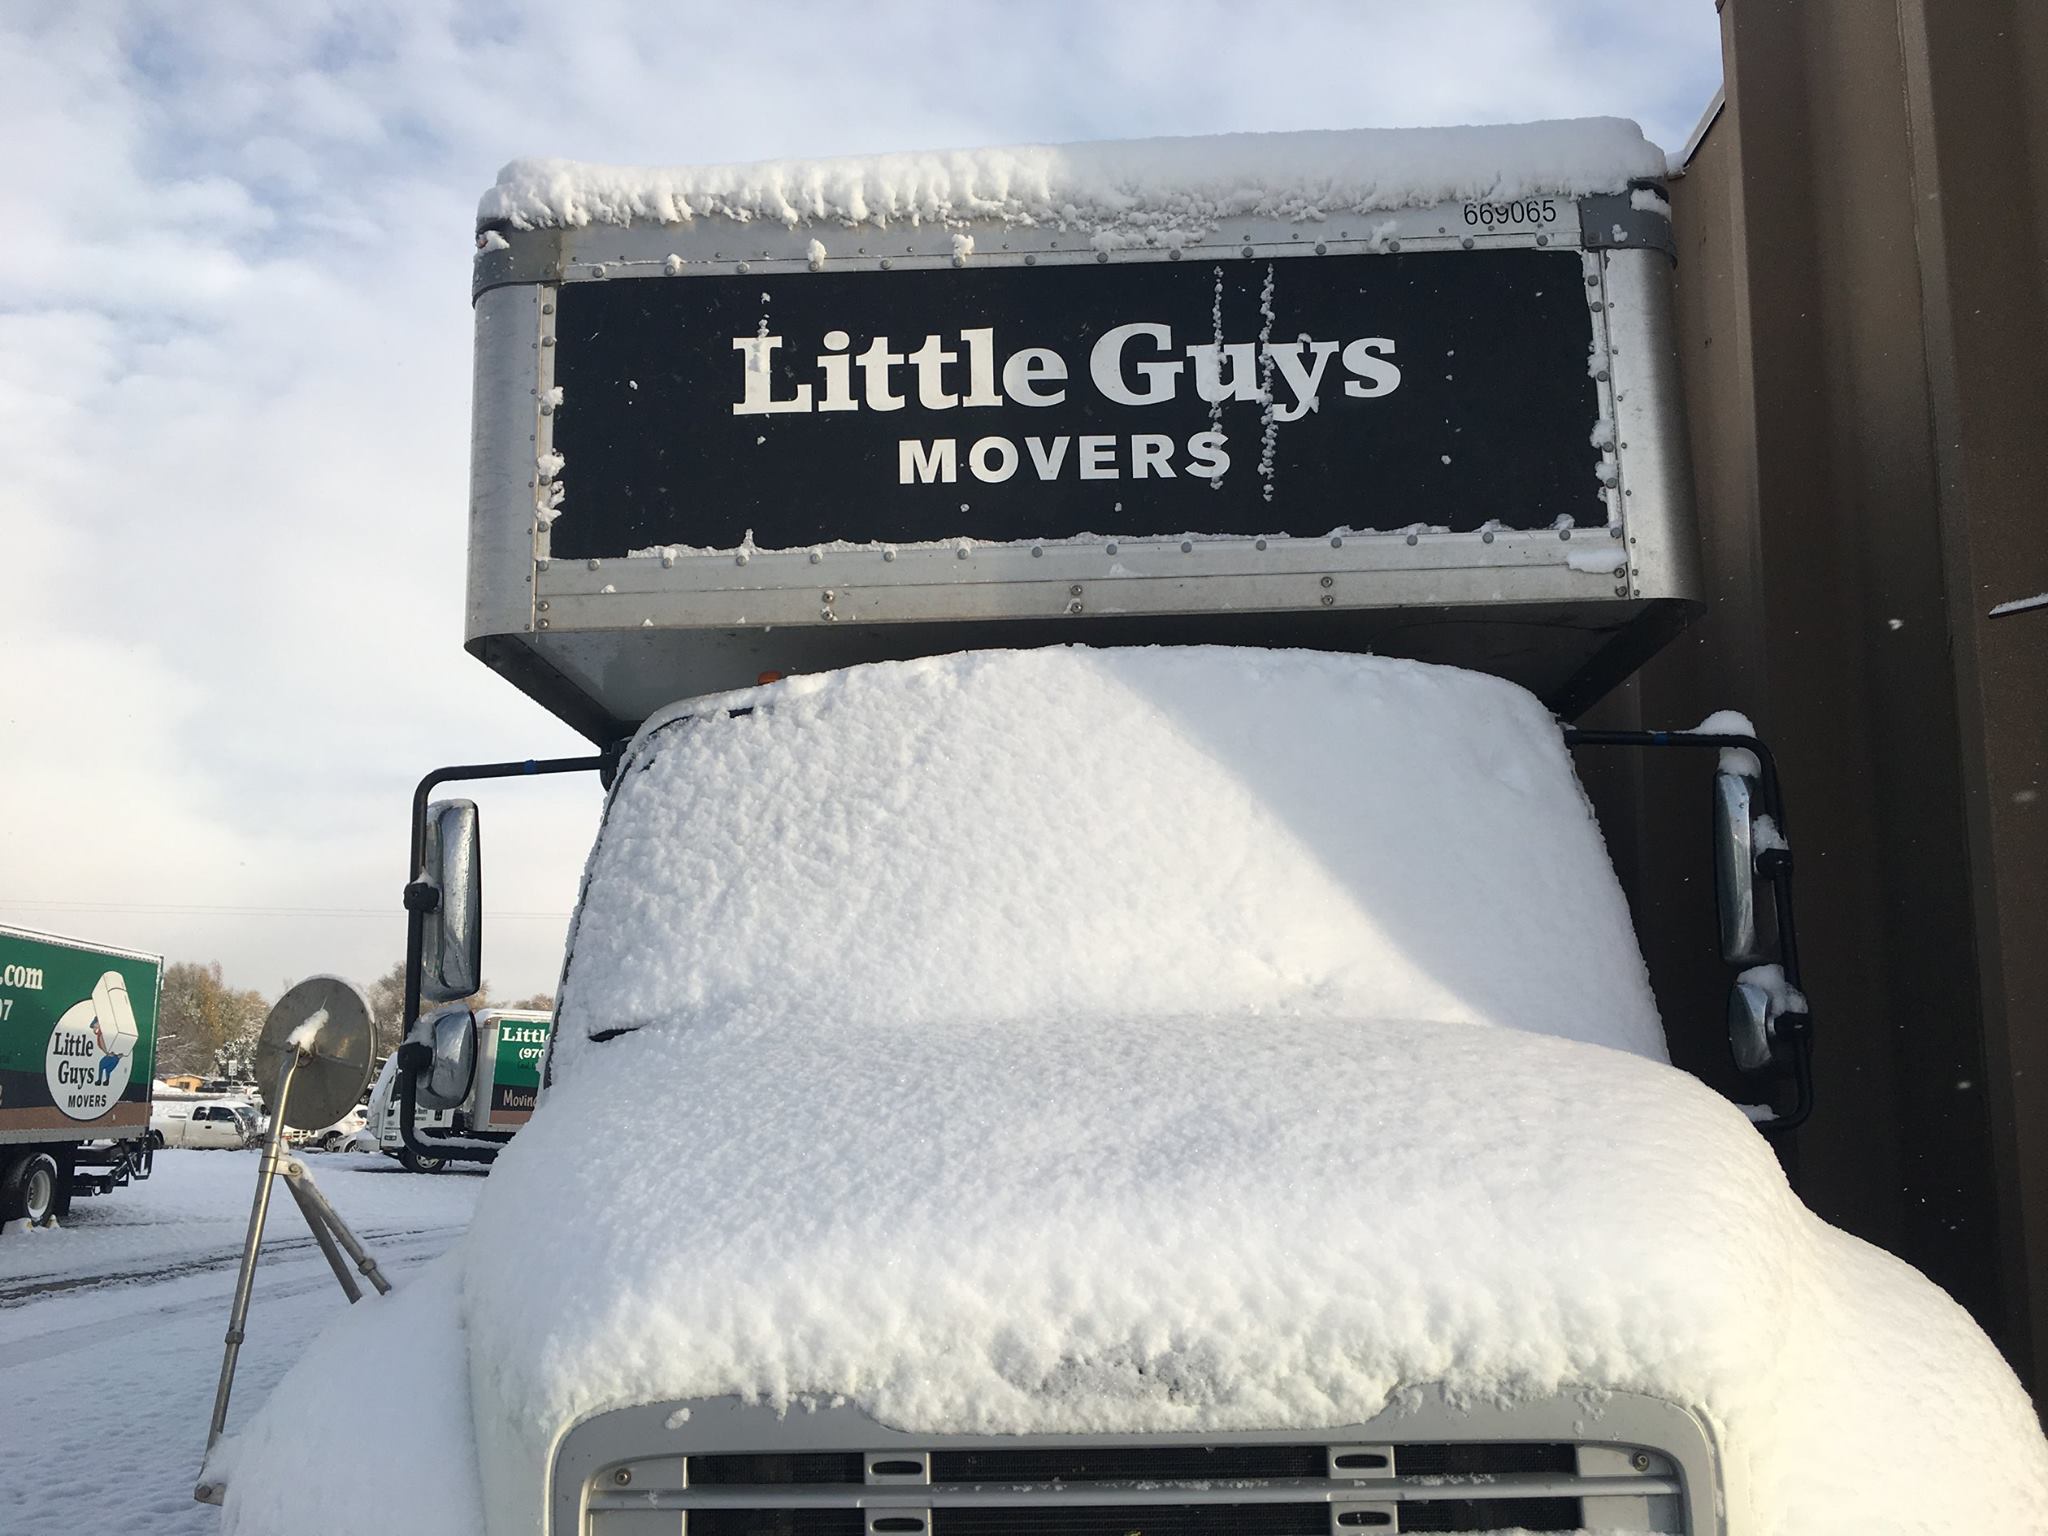 A Little Guys Movers truck covered in snow